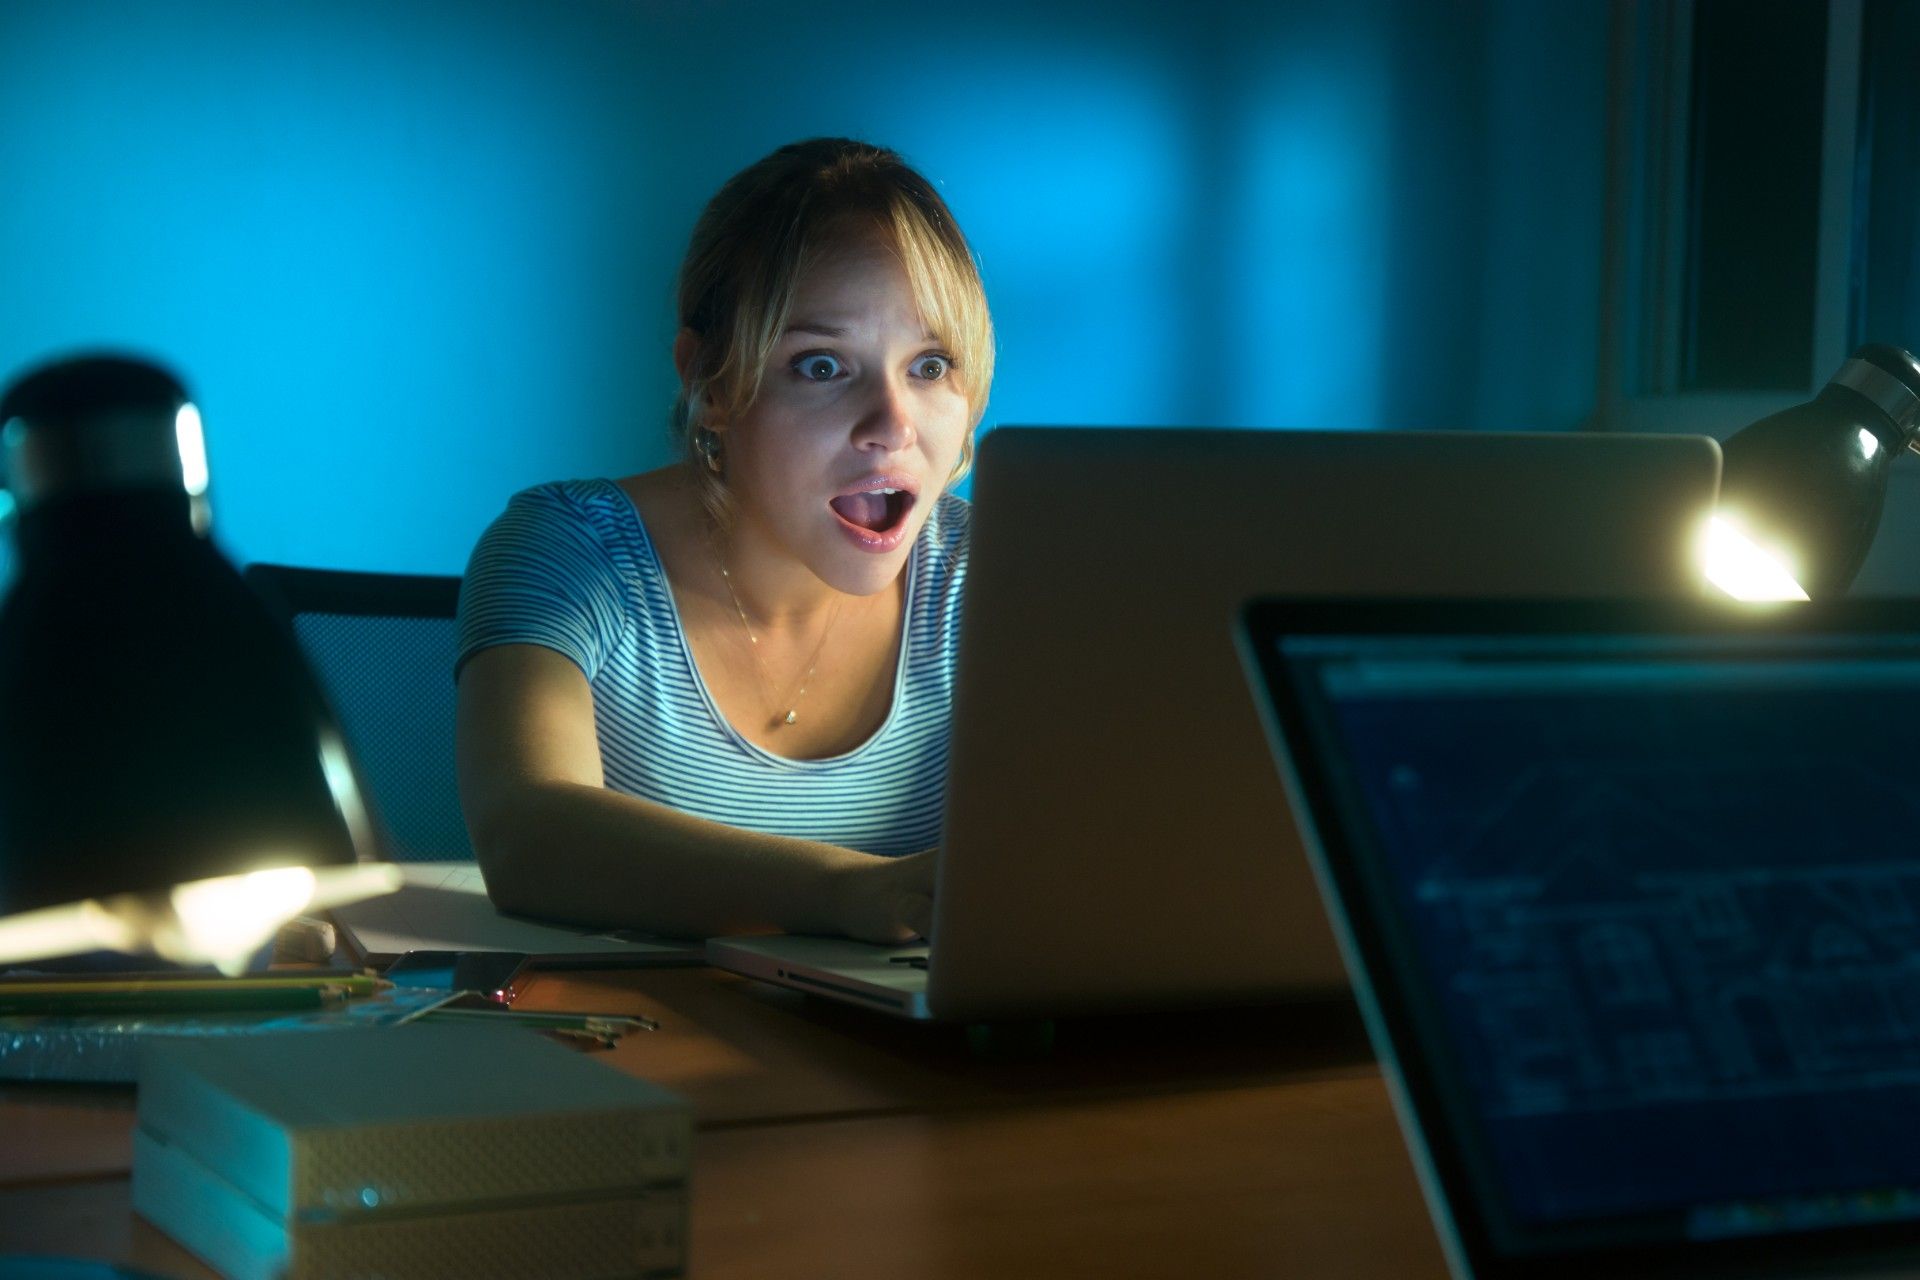 Woman working on laptop at night looks shocked at what she sees on the monitor - ASU